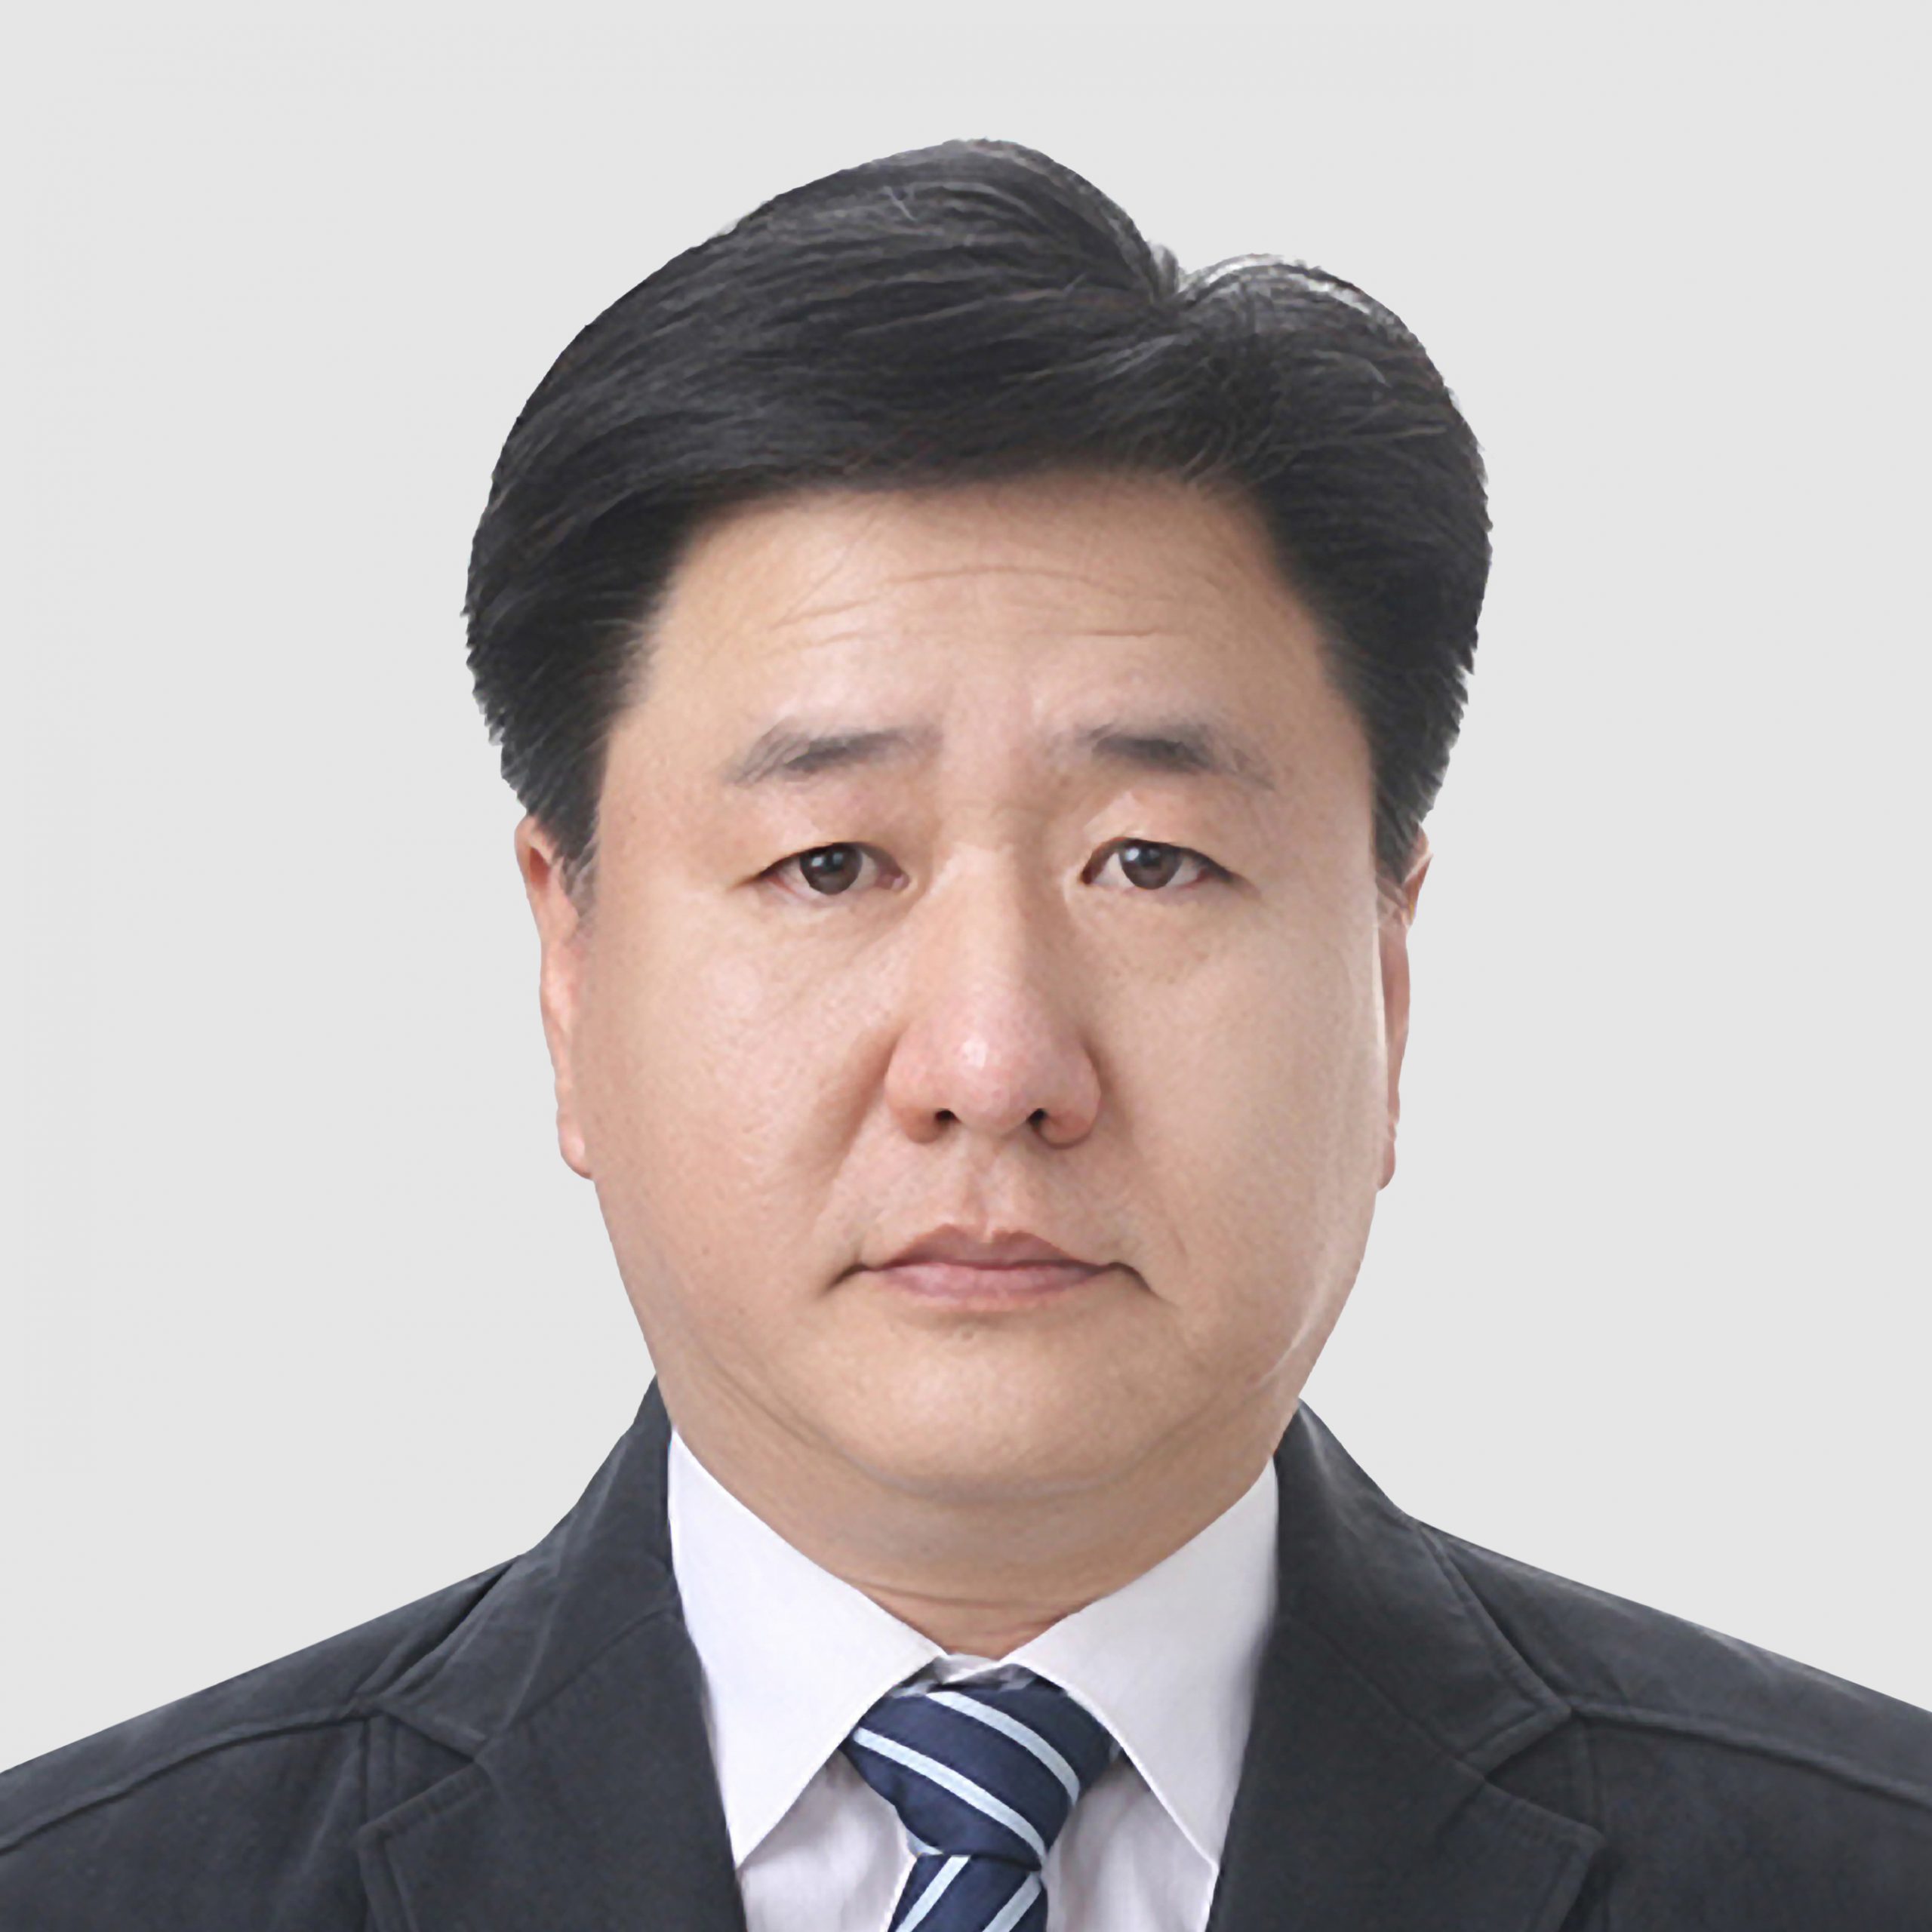 Joonhee (Albert) Lee is the Managing Director, Essex Furukawa Magnet Wire China, a role that focuses on the automotive industry with a specific emphasis on traction motors. It is a position that he transitioned into after the completion of the Essex Furukawa Joint Venture. Prior to this, Lee spent four years as Executive Director of Technology for Essex Magnet Wire and over the last quarter century Lee has been involved in developing new technology with a focus on the automotive industry. He has improved magnet wire property design for motor applications, as well as improved properties for enameling. Lee obtained his Master’s Degree in Industrial Chemistry at Kyungpook National University in South Korea.